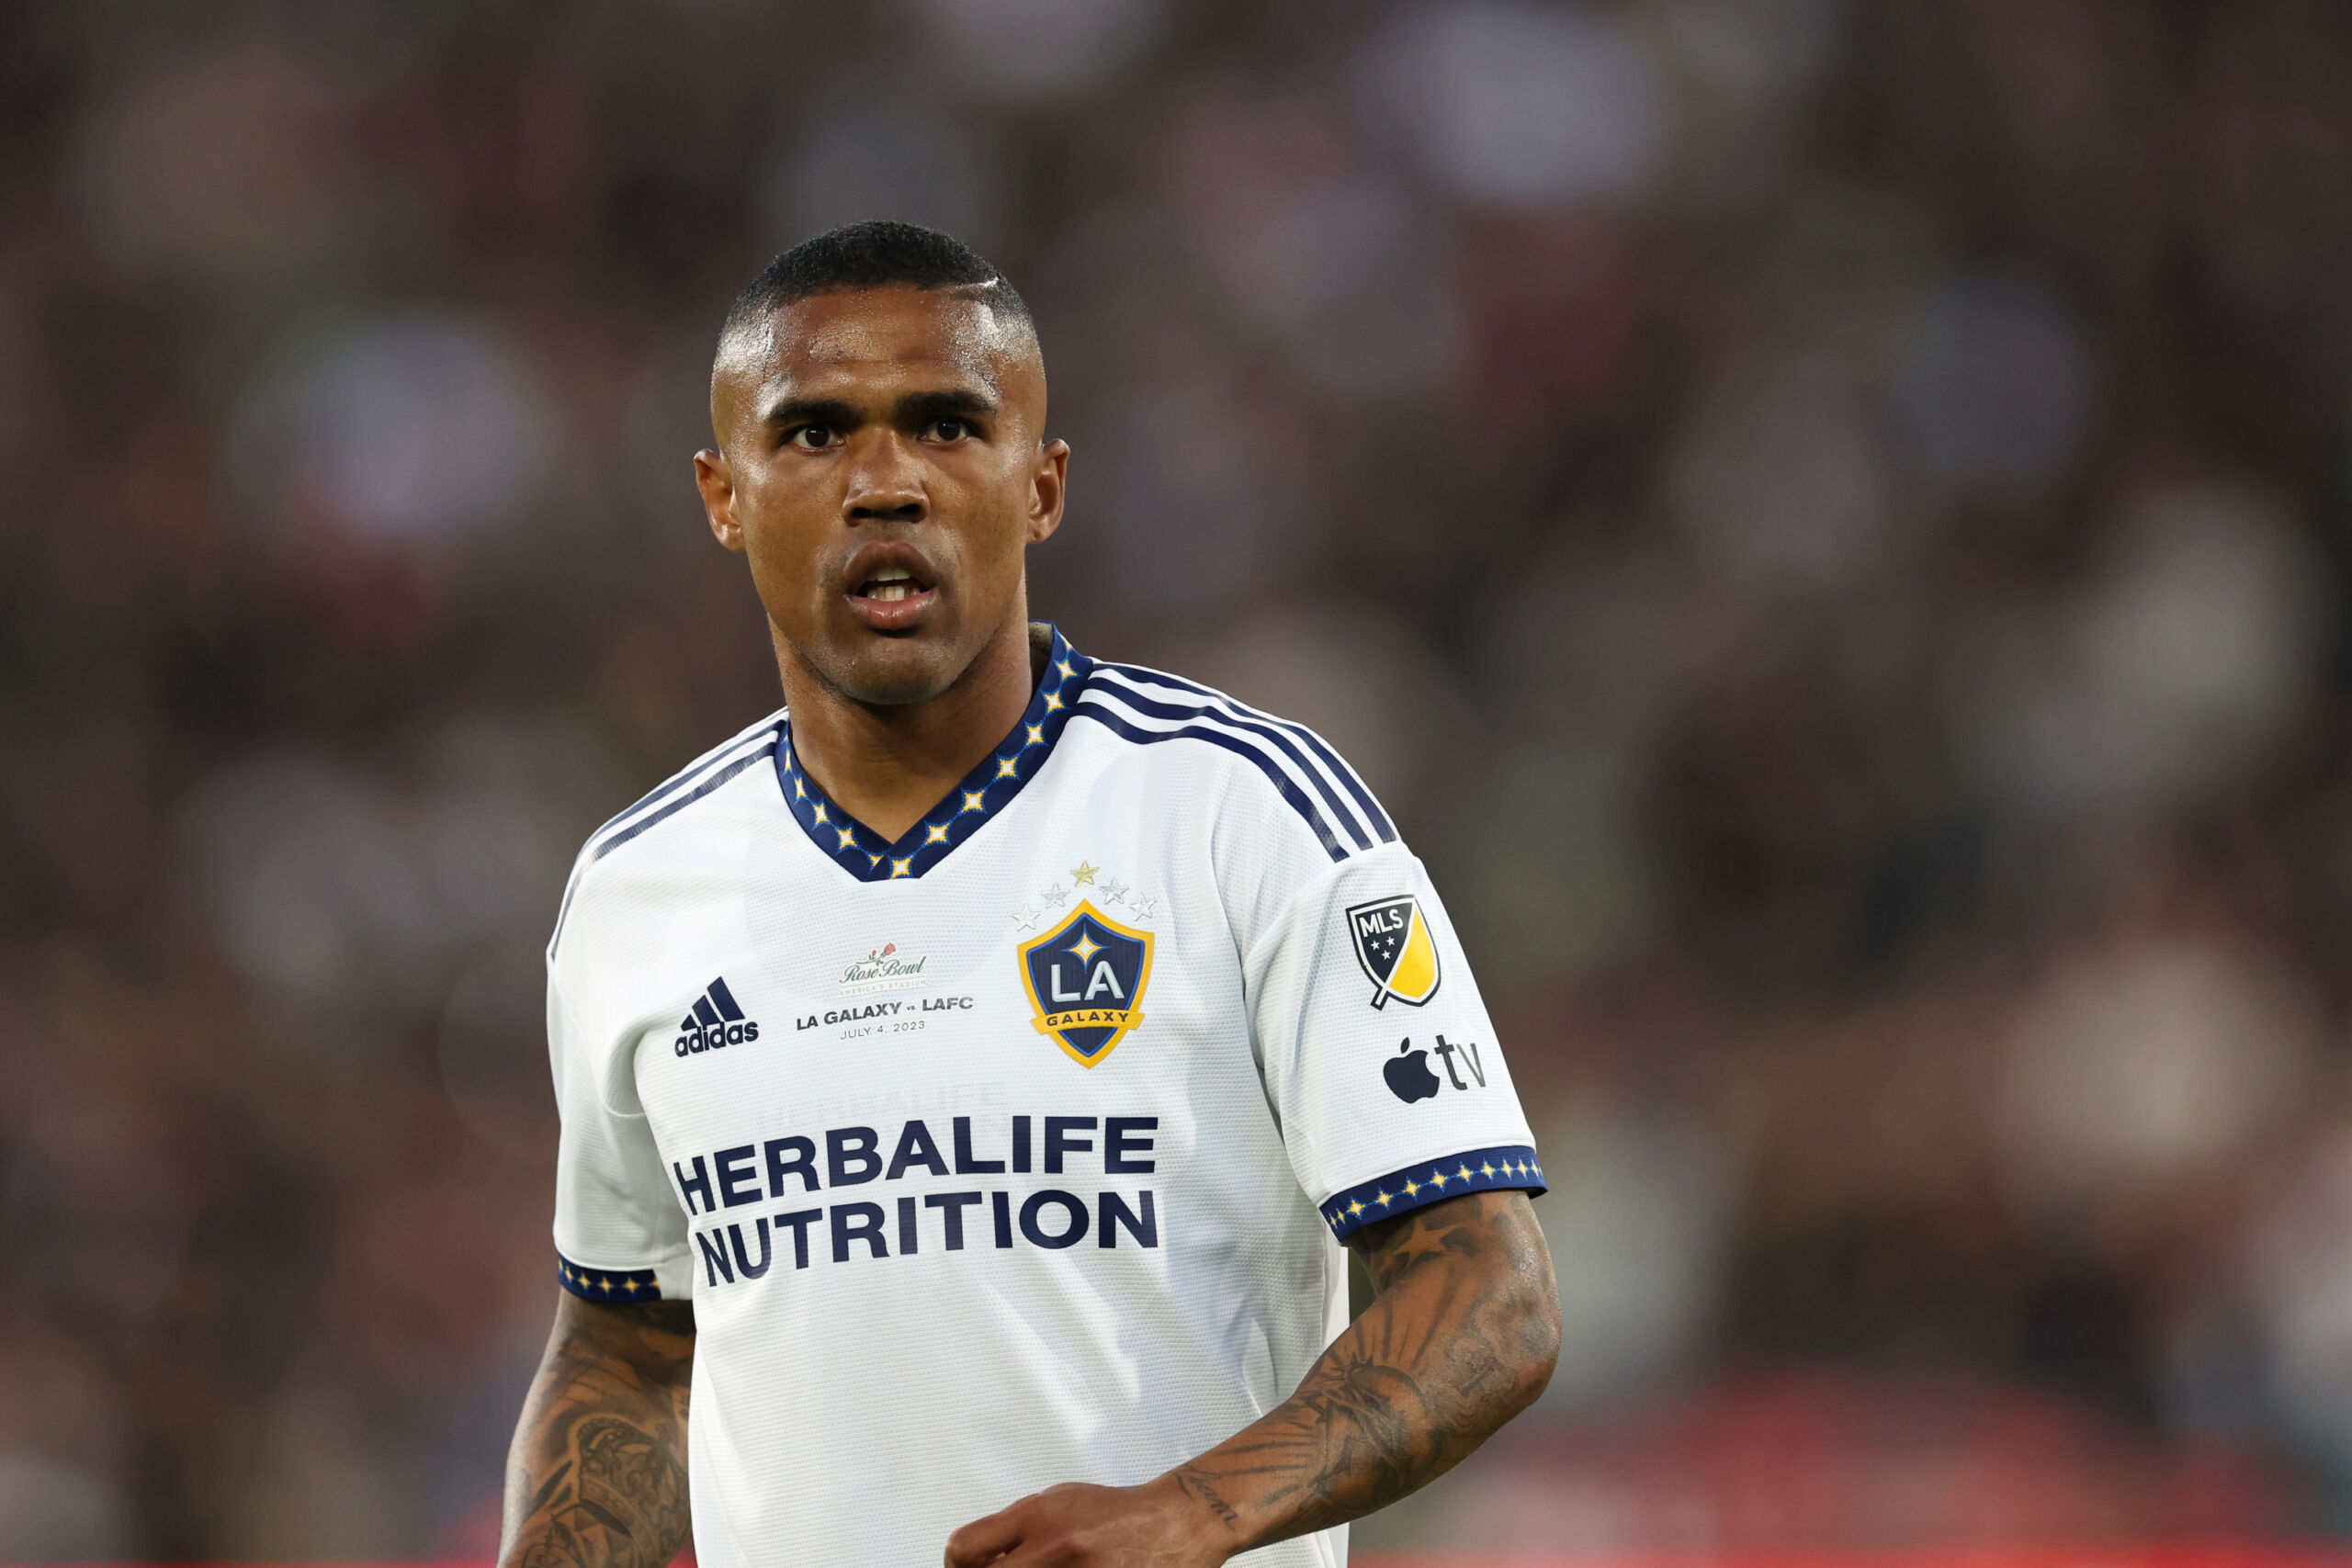 Douglas Costa is openly campaigning for his Juventus return as he’s seeking a new team after the end of his spell with the Los Angeles Galaxy.